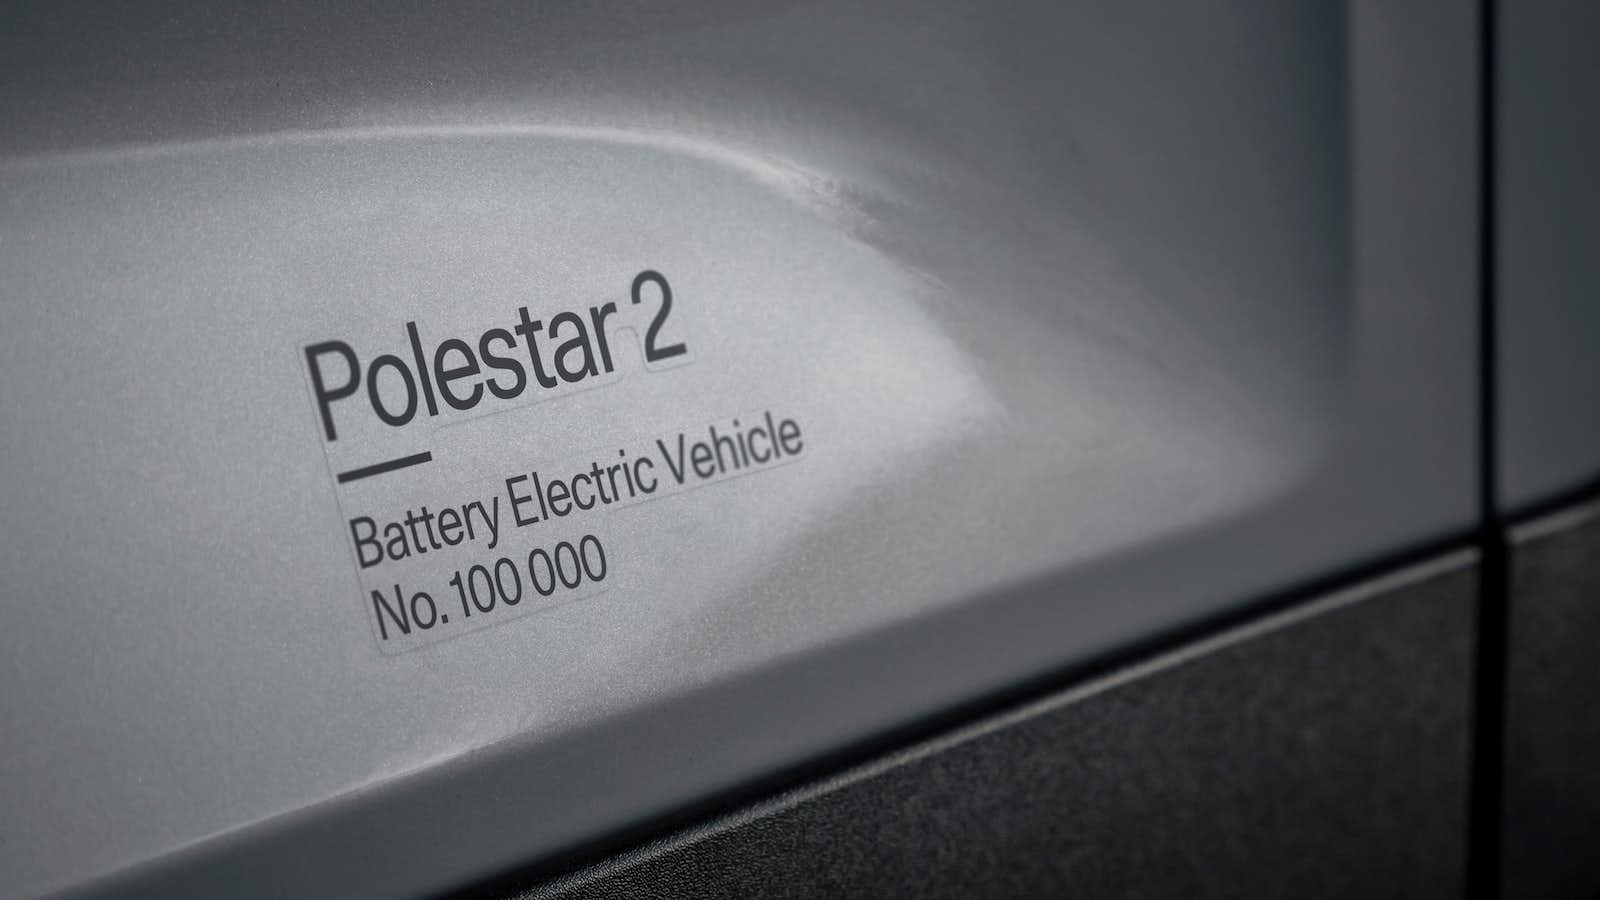 In our industry, there’s a lot of talk about 0-100. Sure, speed can be thrilling when driving, but speed in delivering potential climate solutions is what actually matters. And speaking of which, Polestar 2 went from 0-100,000 in only 2.5 years.